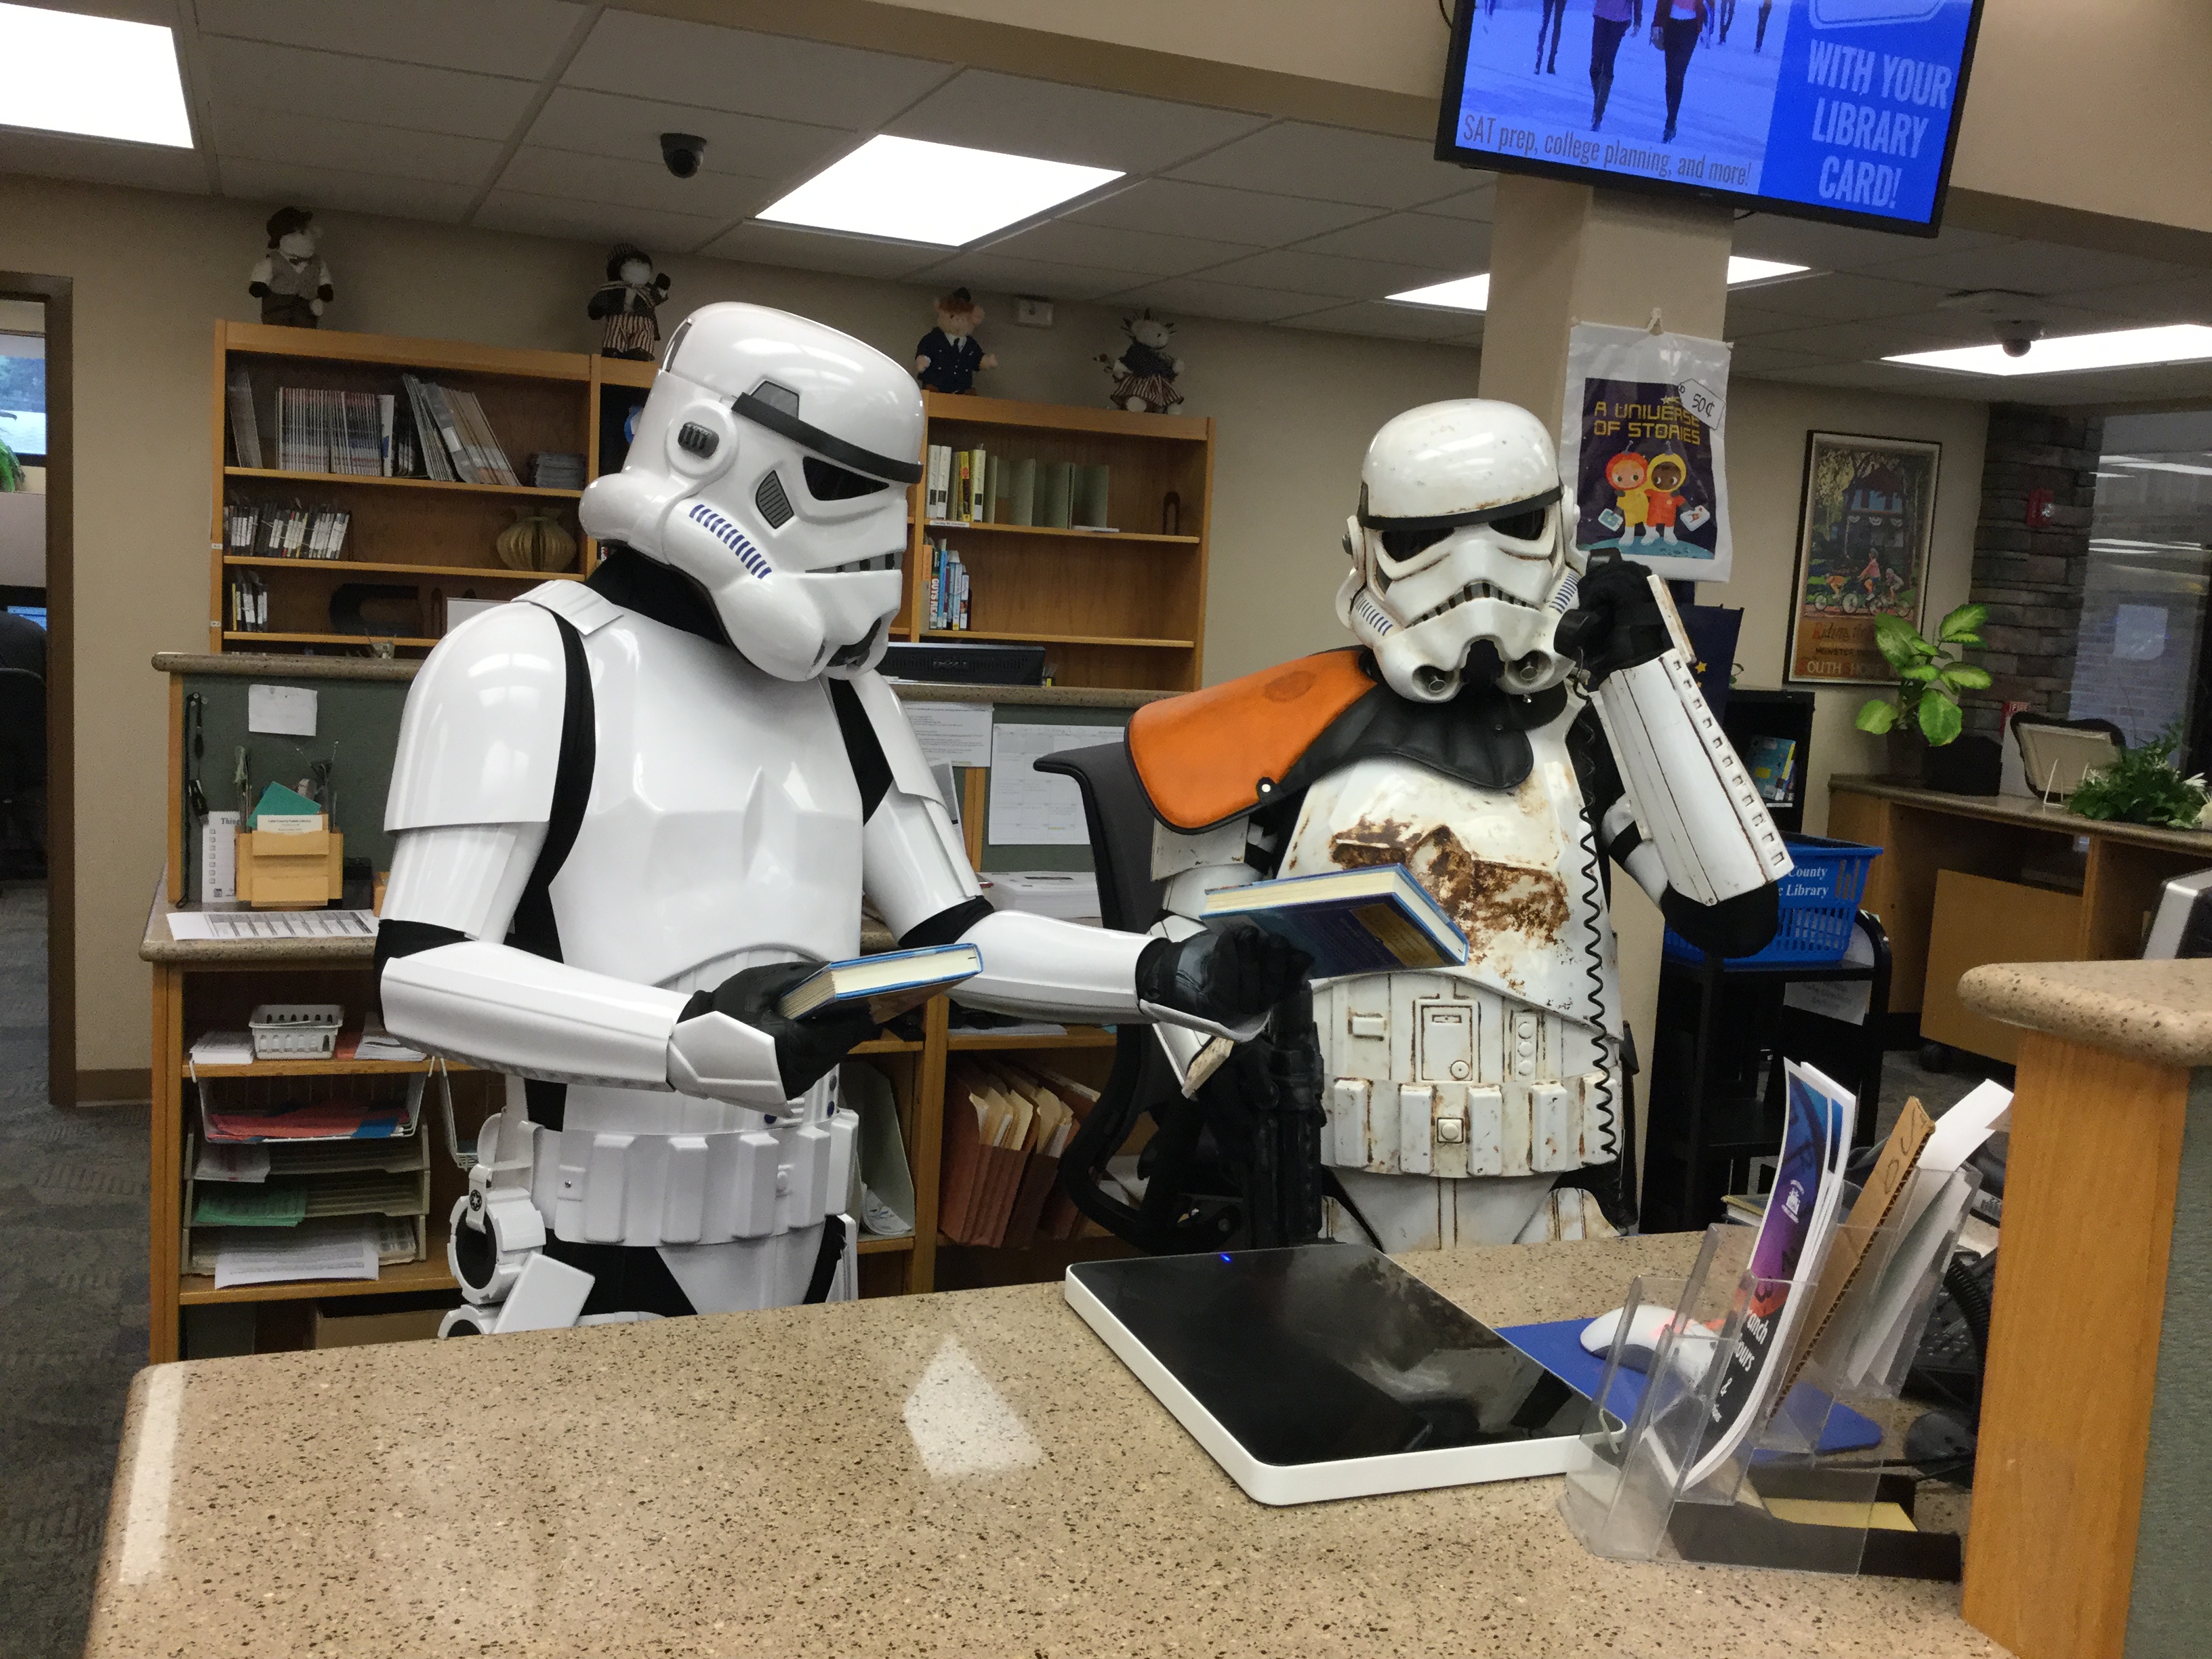 Two stormtroopers behind a library desk. One is on the phone, the other is offering a book for his inspection